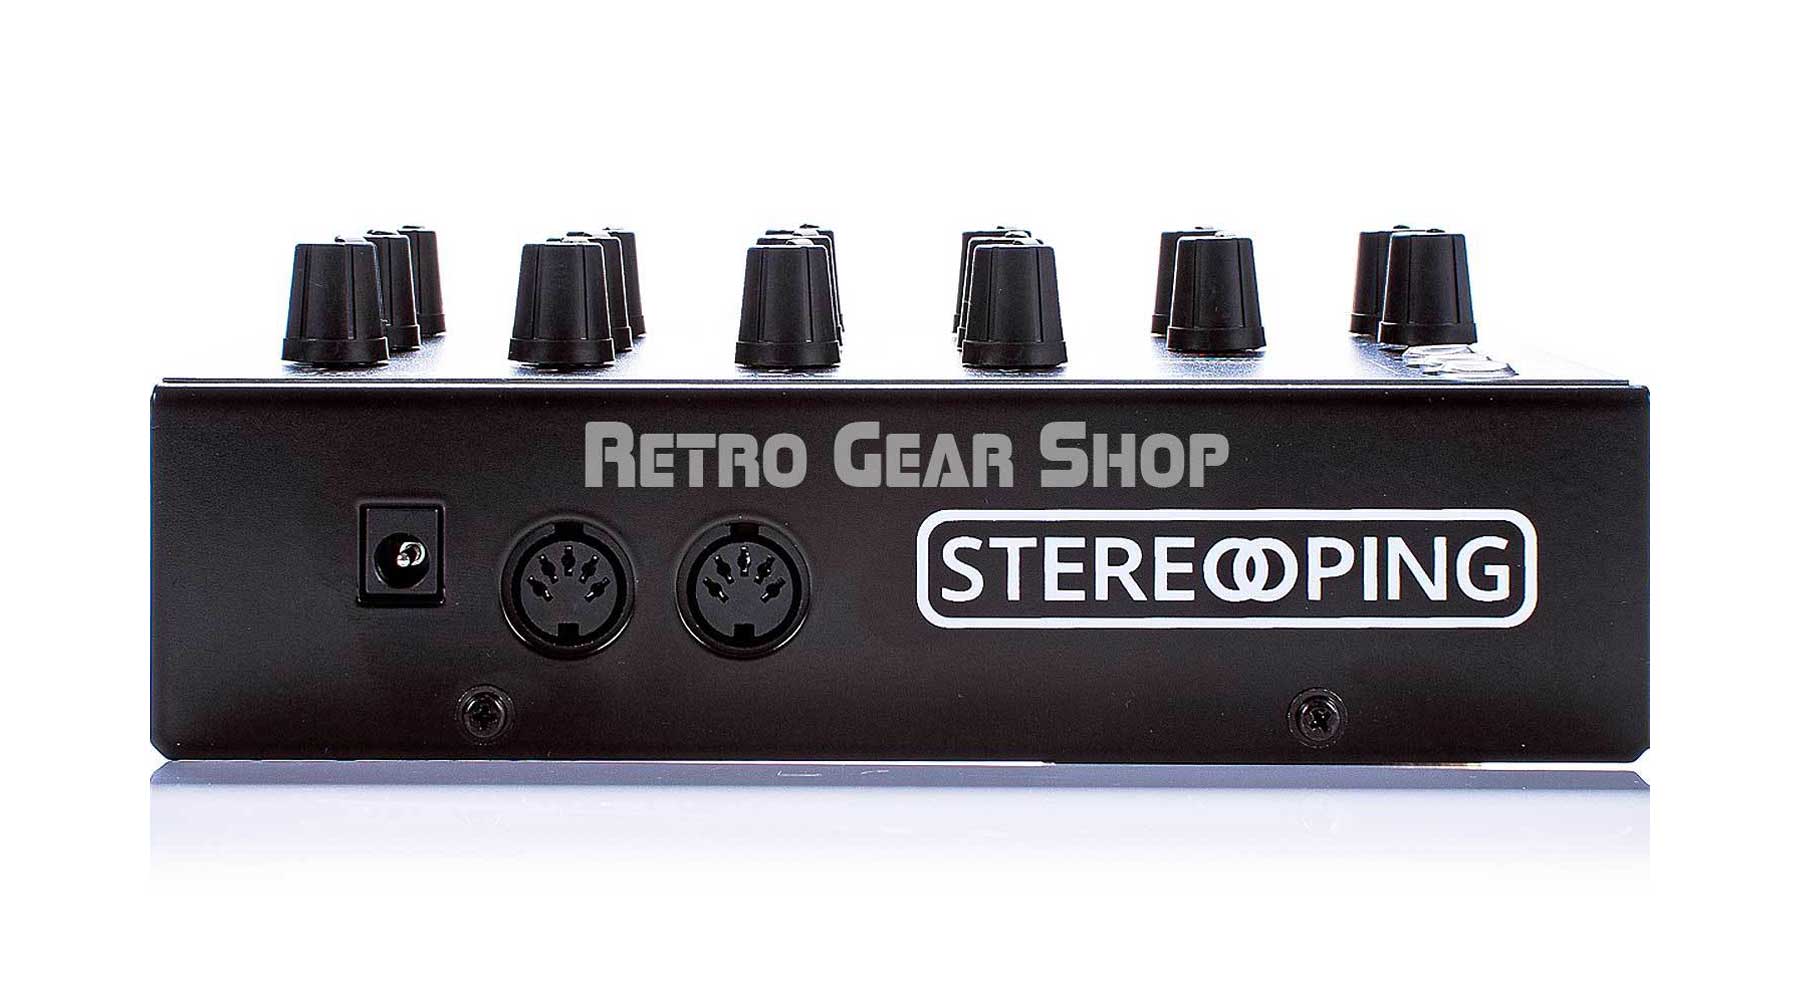 Stereoping CE-1 Midi Synthesizer Sample Polka Rear